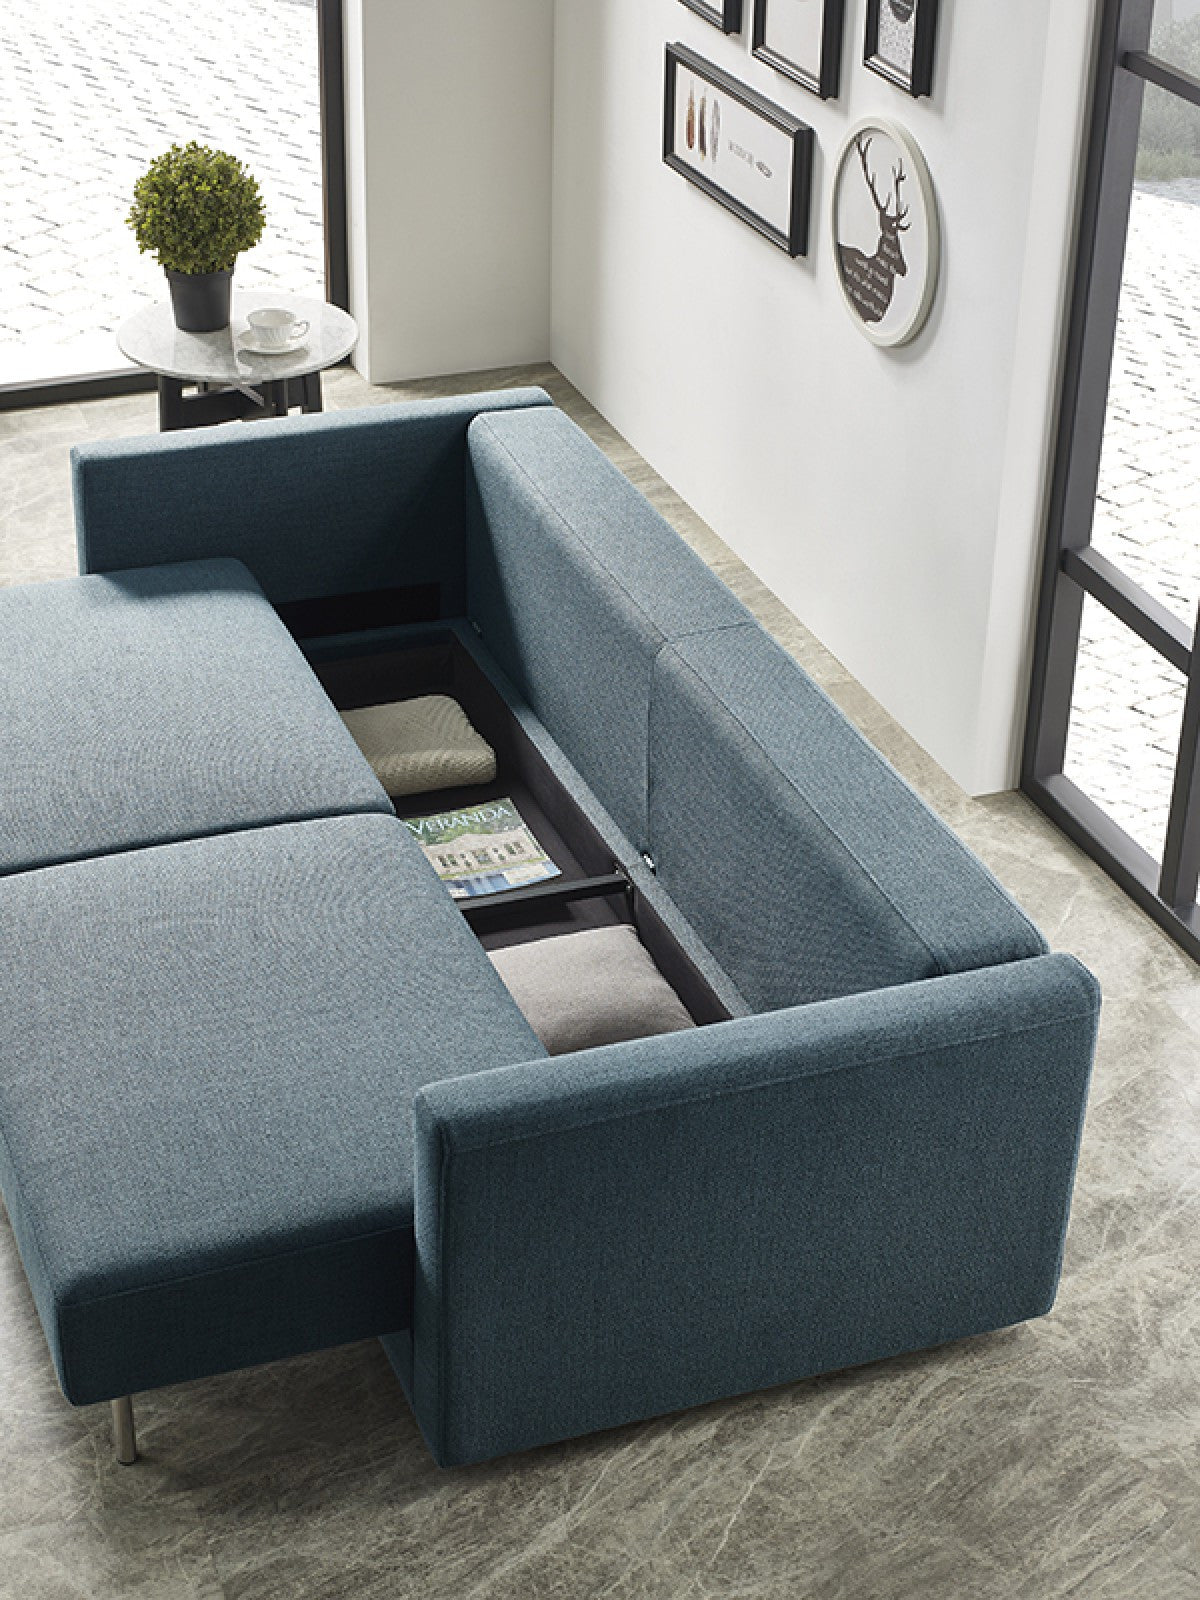 Long Arm 88" Blue Green Sofa Bed With Storage Space